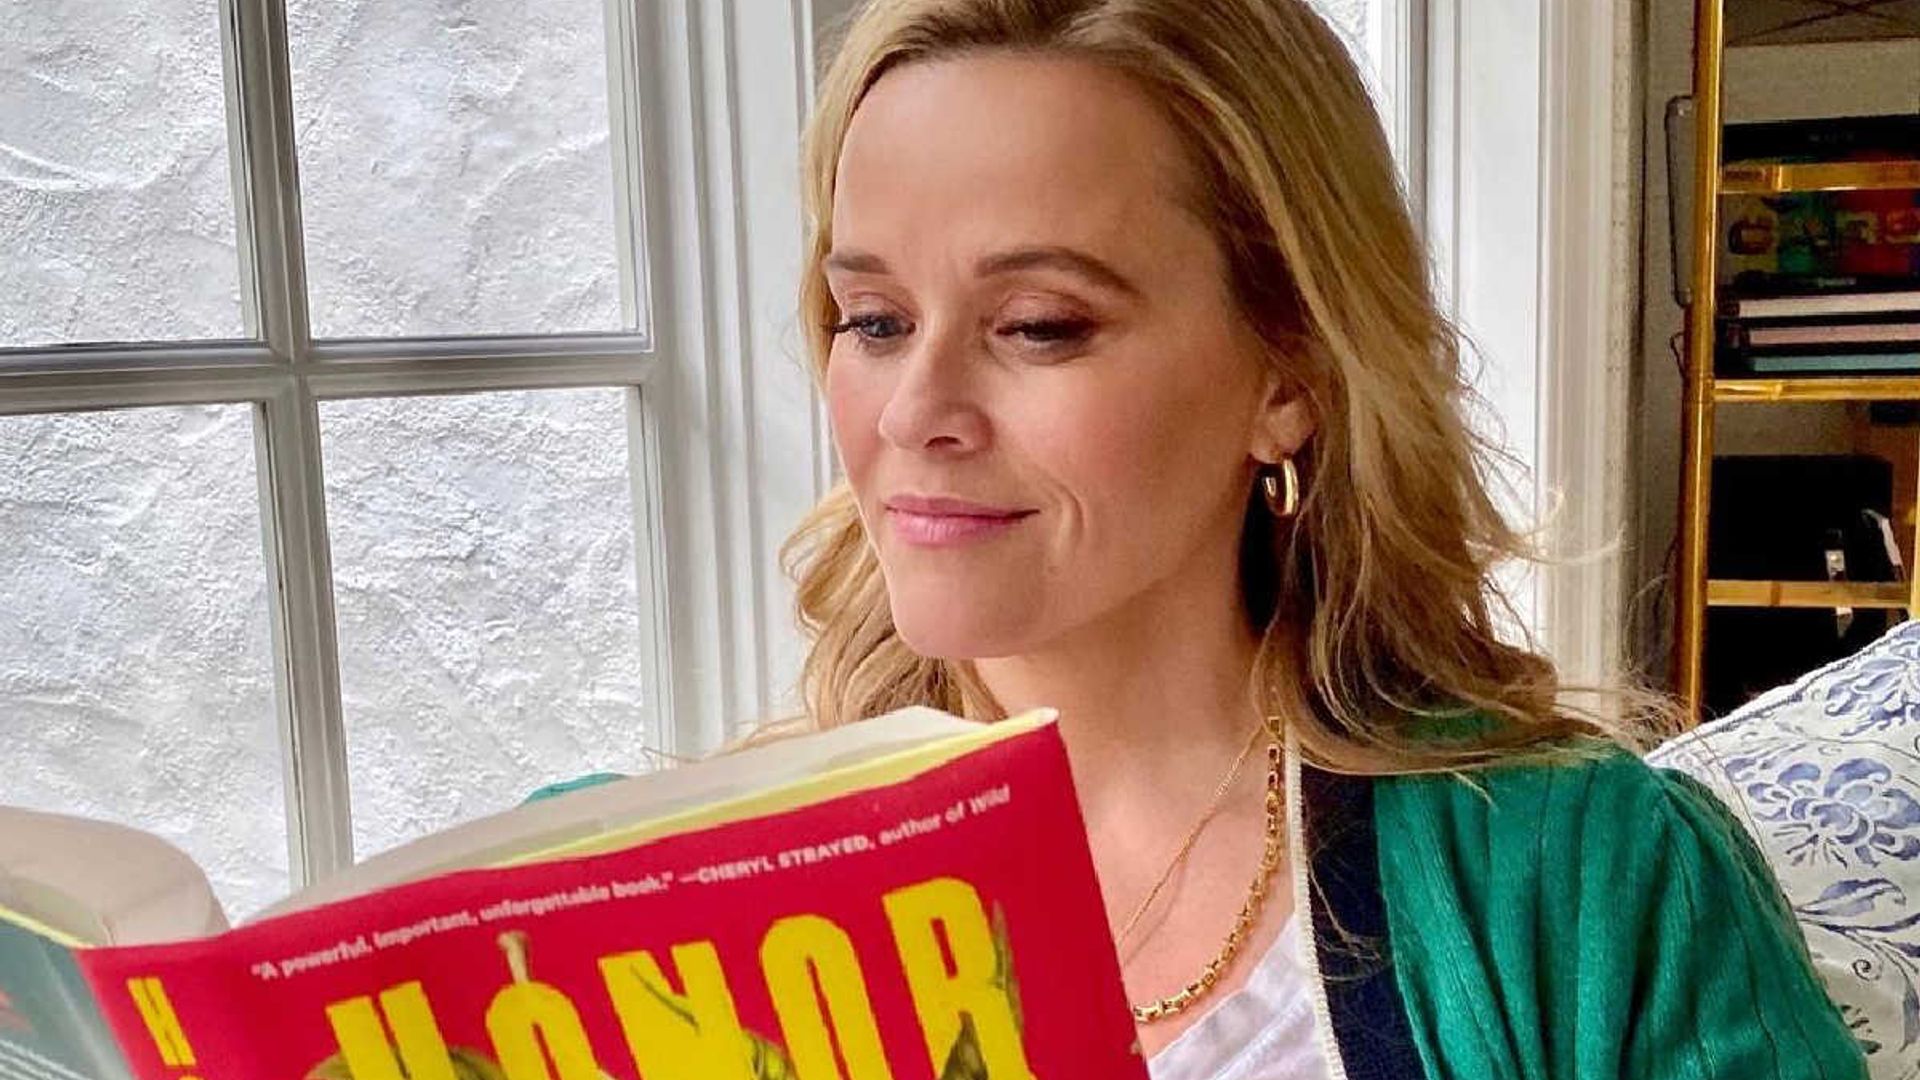 15 Reese Witherspoon Book Club picks from Daisy Jones & the Six to her